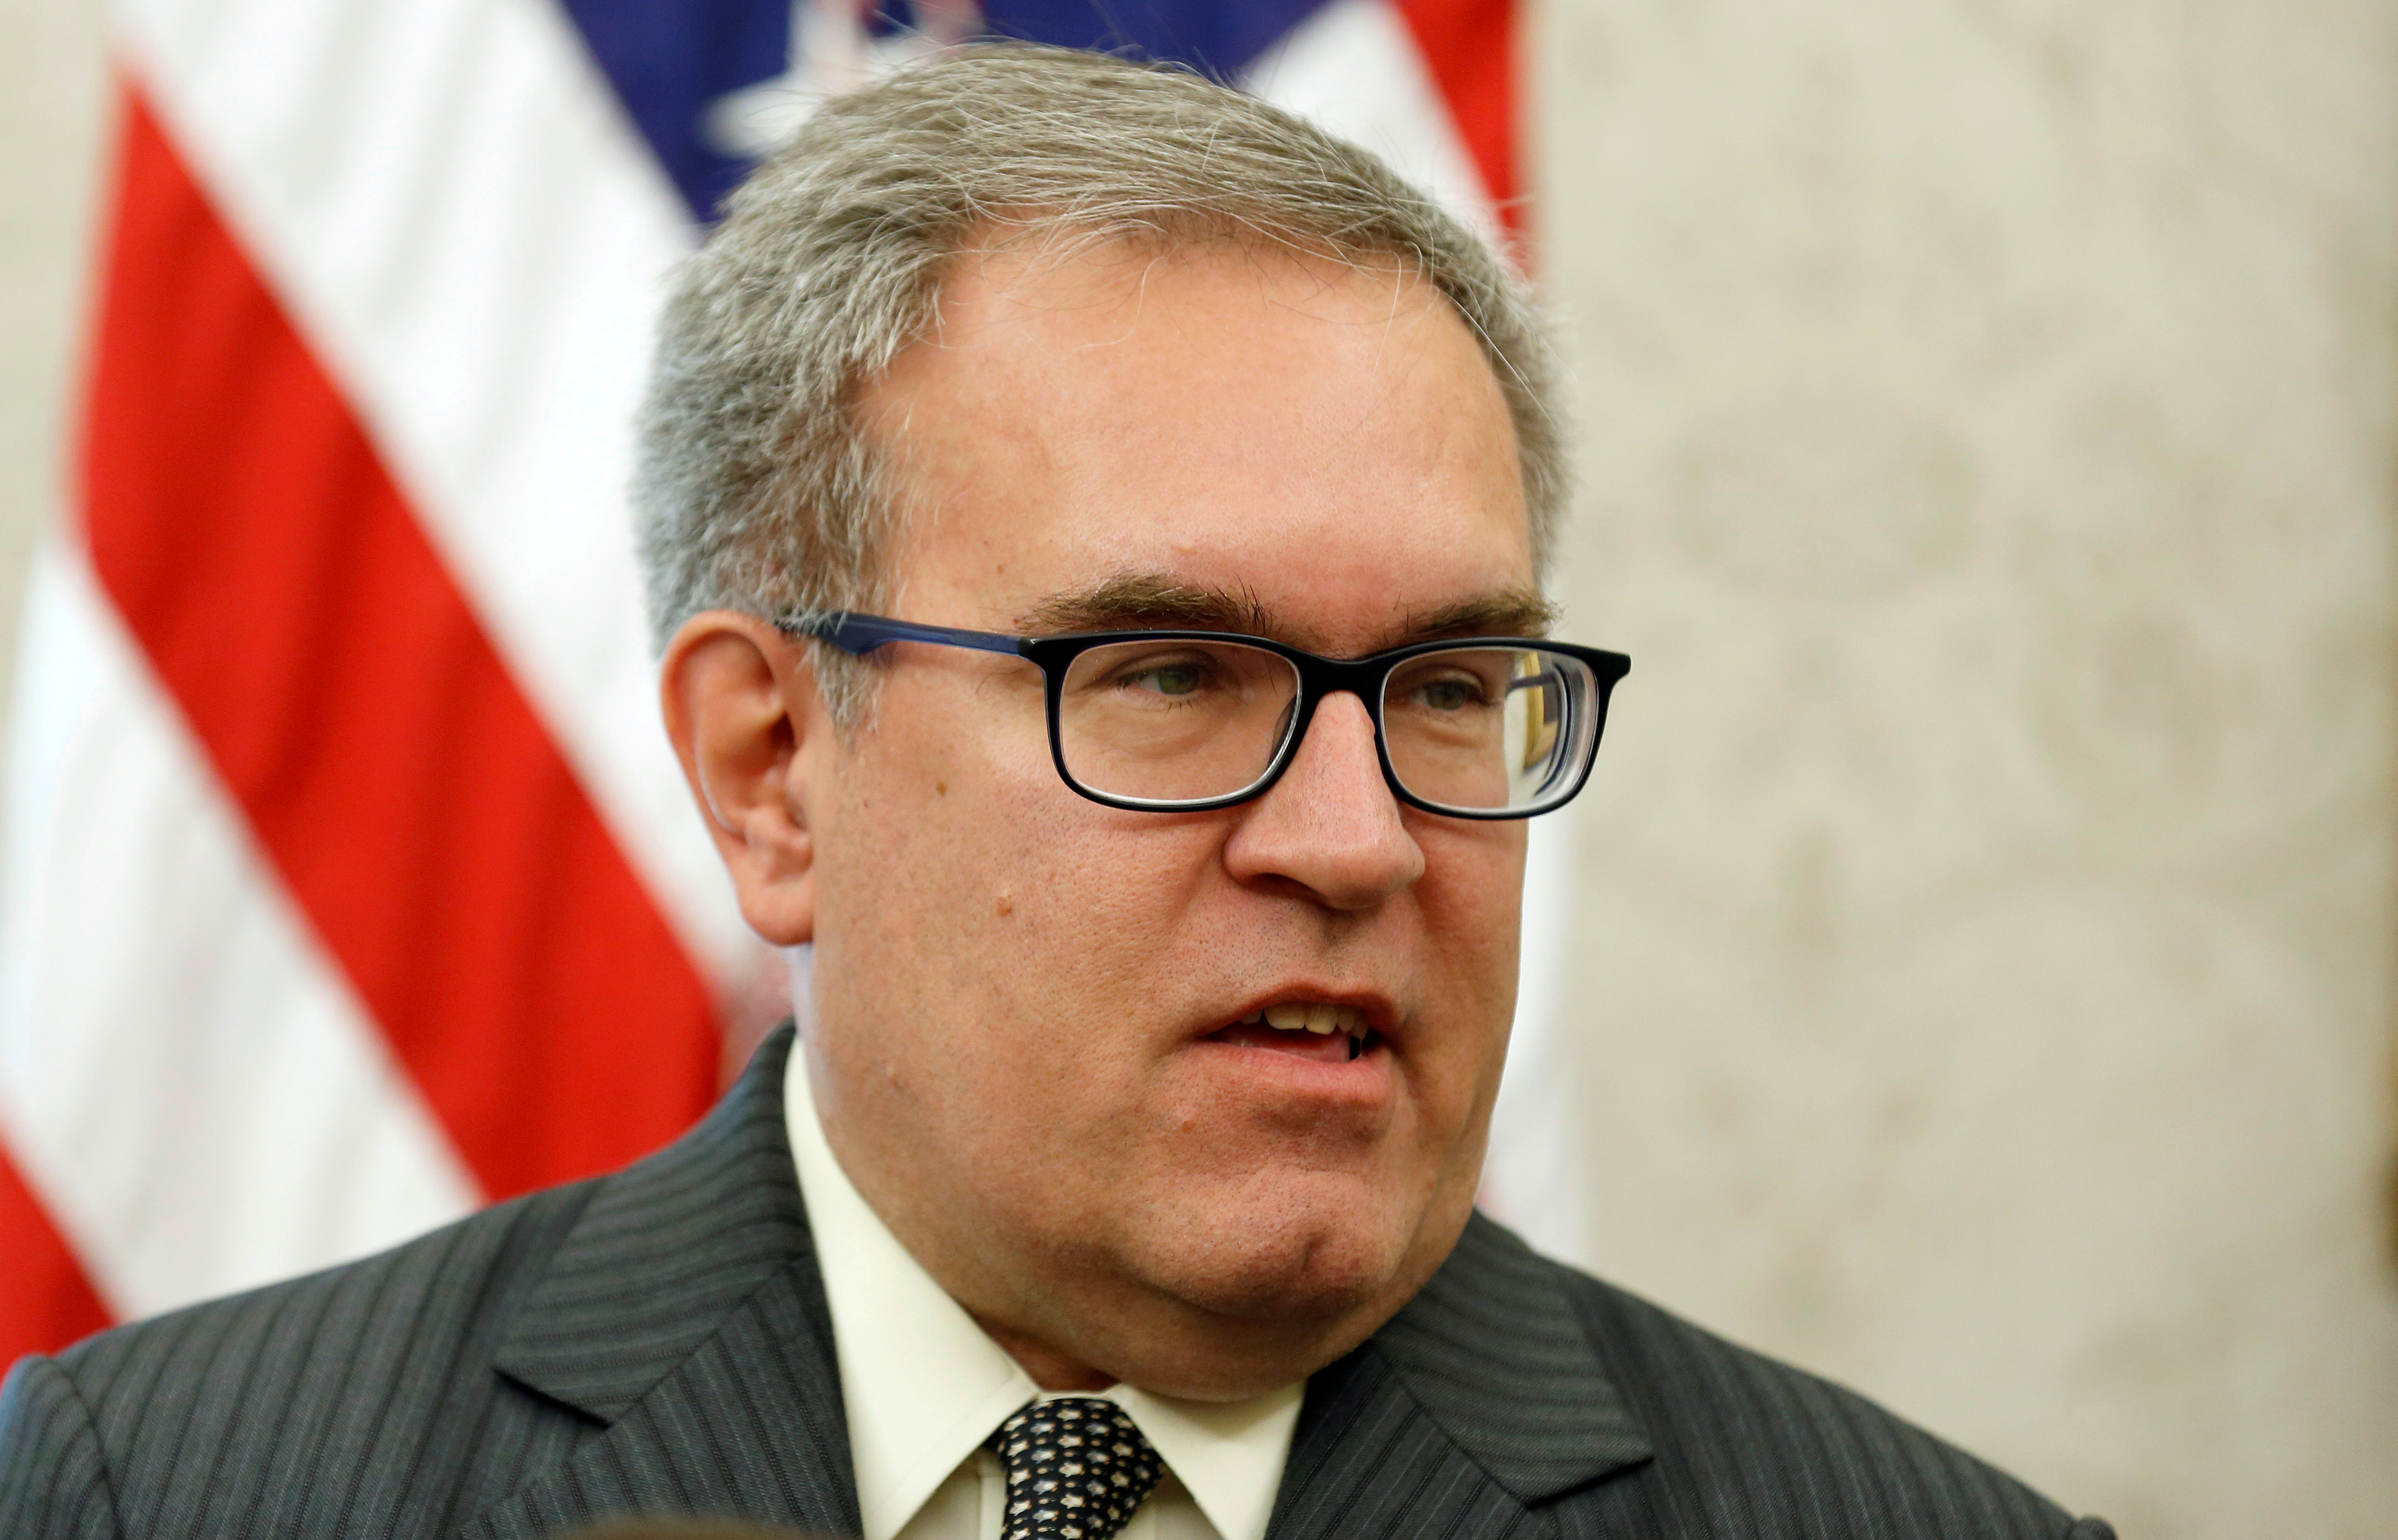 Acting Administrator of the Environmental Protection Agency Andrew Wheeler speaks during an event in the Oval Office of the White House in Washington